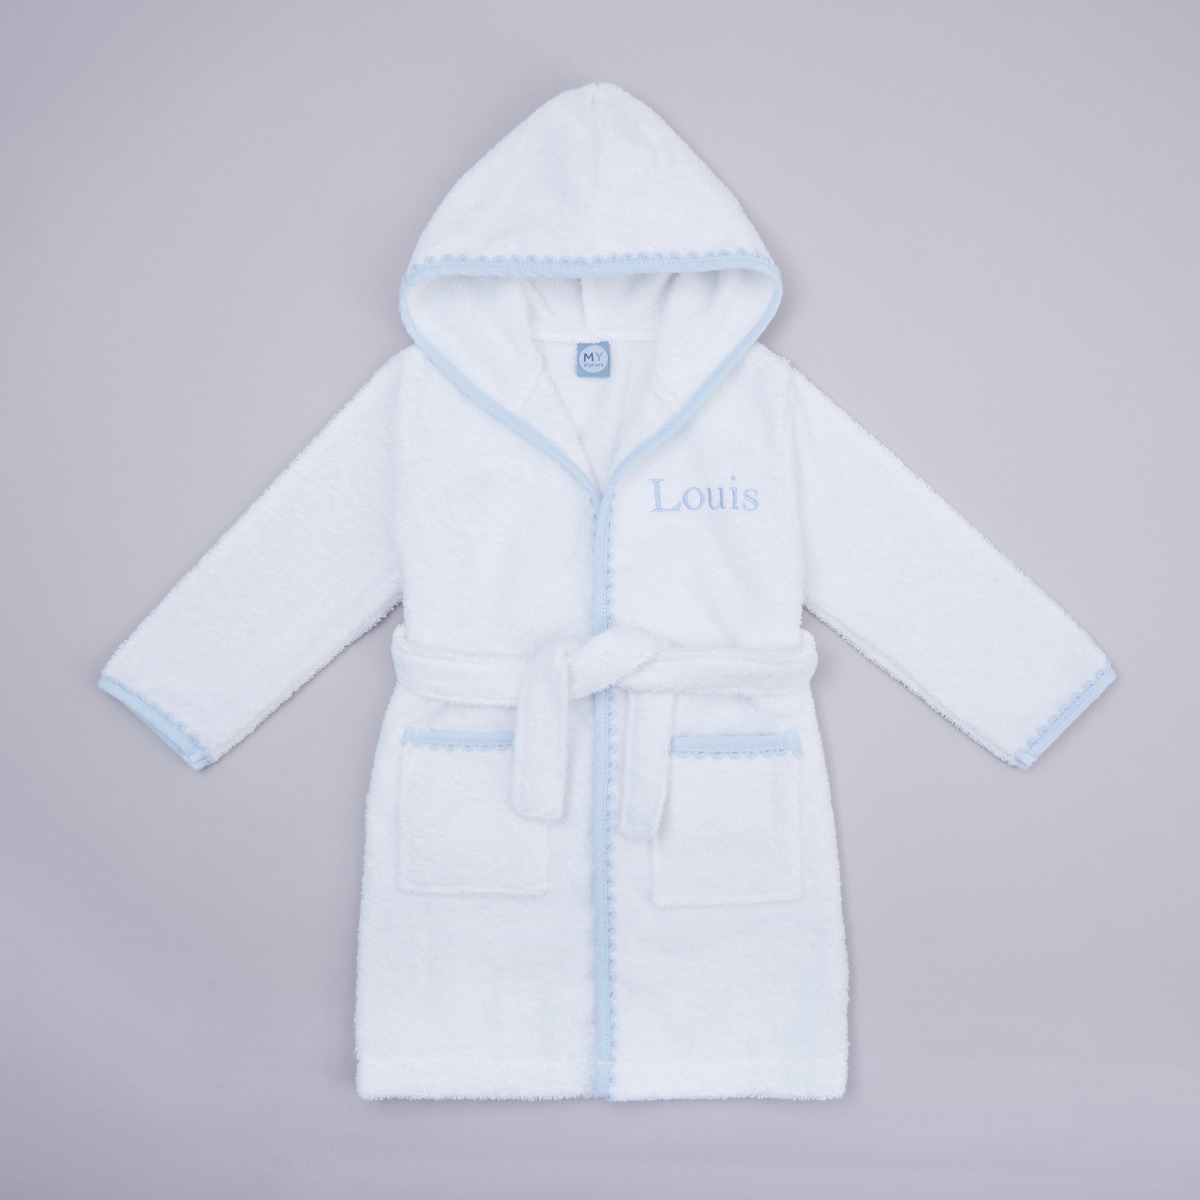 Personalised Blue Picot Trim Dressing Gown